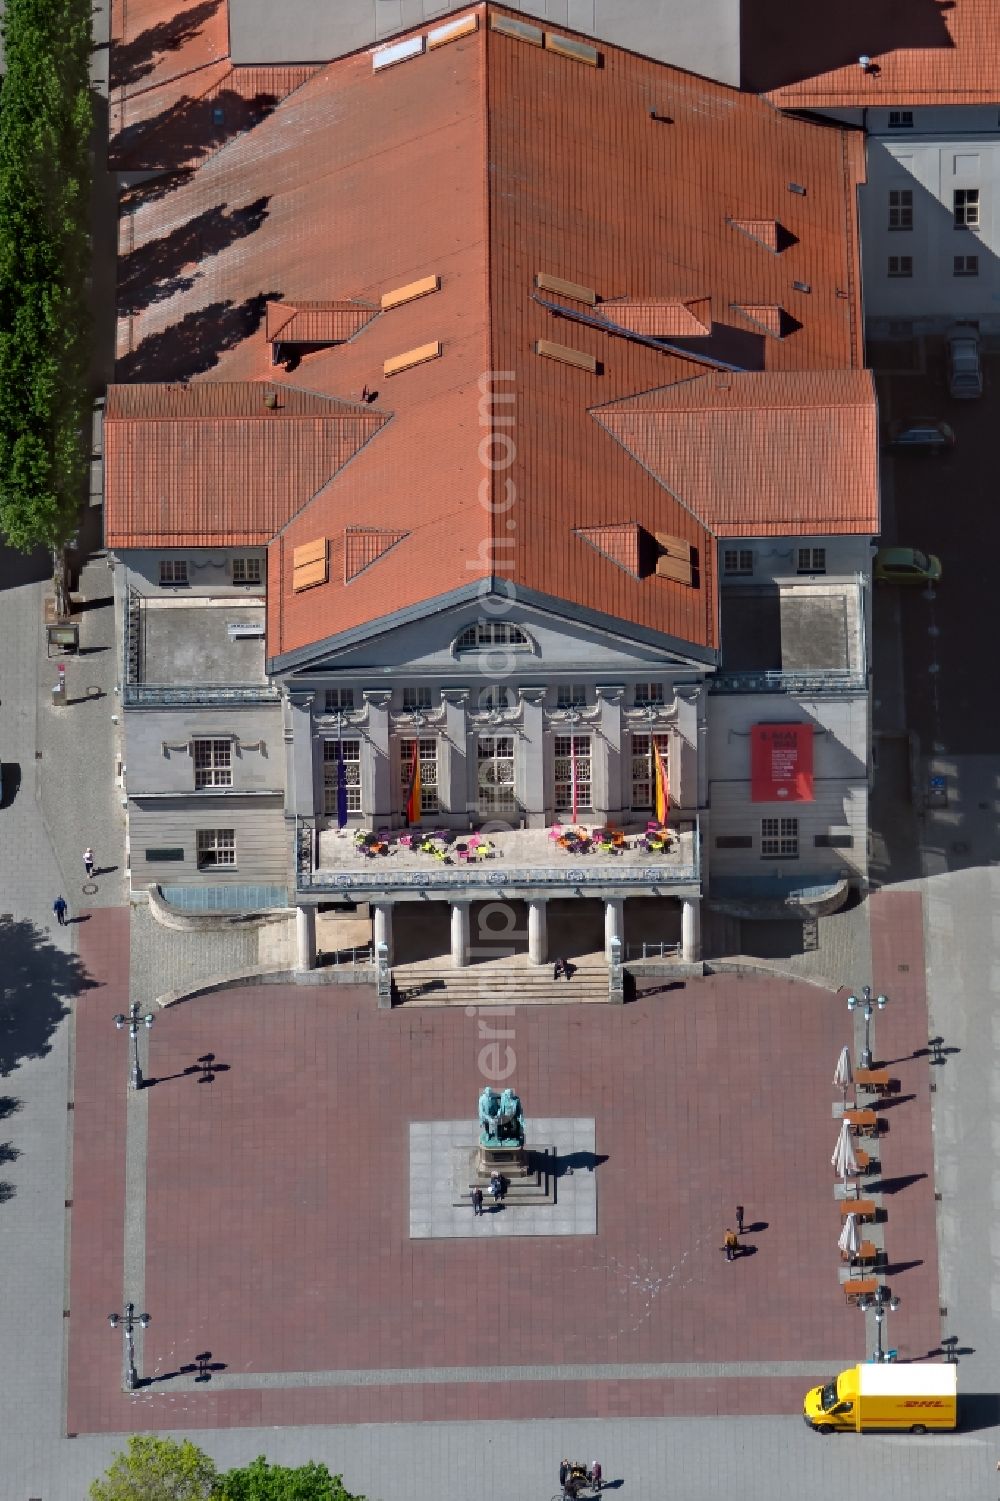 Aerial photograph Weimar - Building of the concert hall and theater playhouse Deutsches Nationaltheater und Staatskapelle Weimar with the Goethe-Schiller monument on Theaterplatz in Weimar in the state Thuringia, Germany